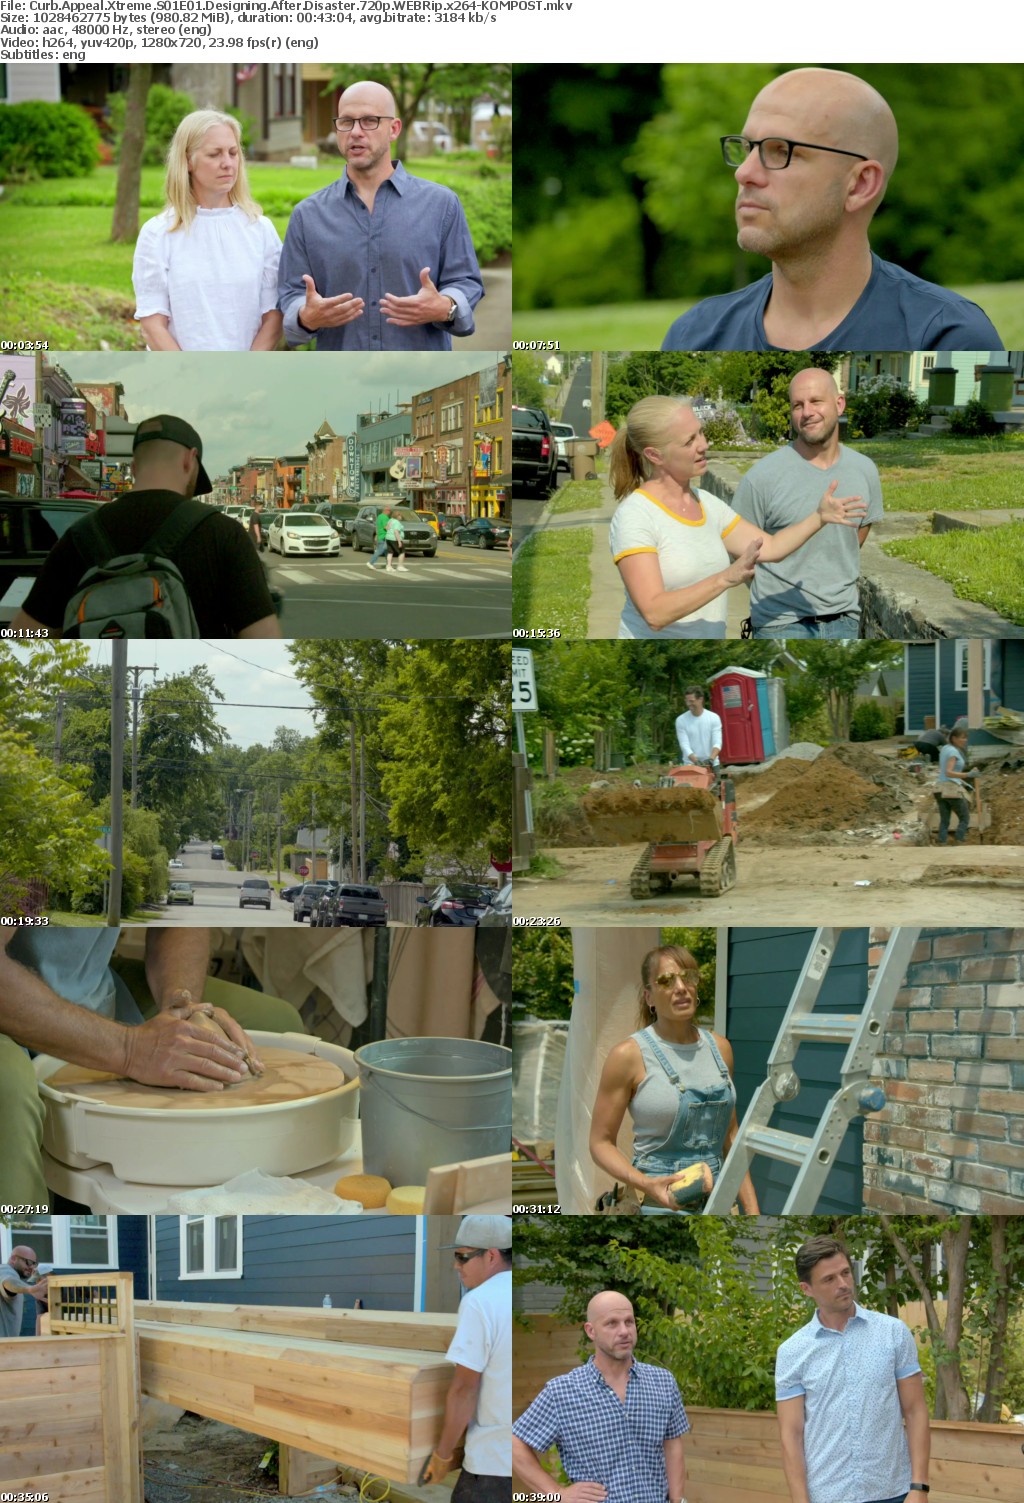 Curb Appeal Xtreme S01E01 Designing After Disaster 720p WEBRip x264-KOMPOST